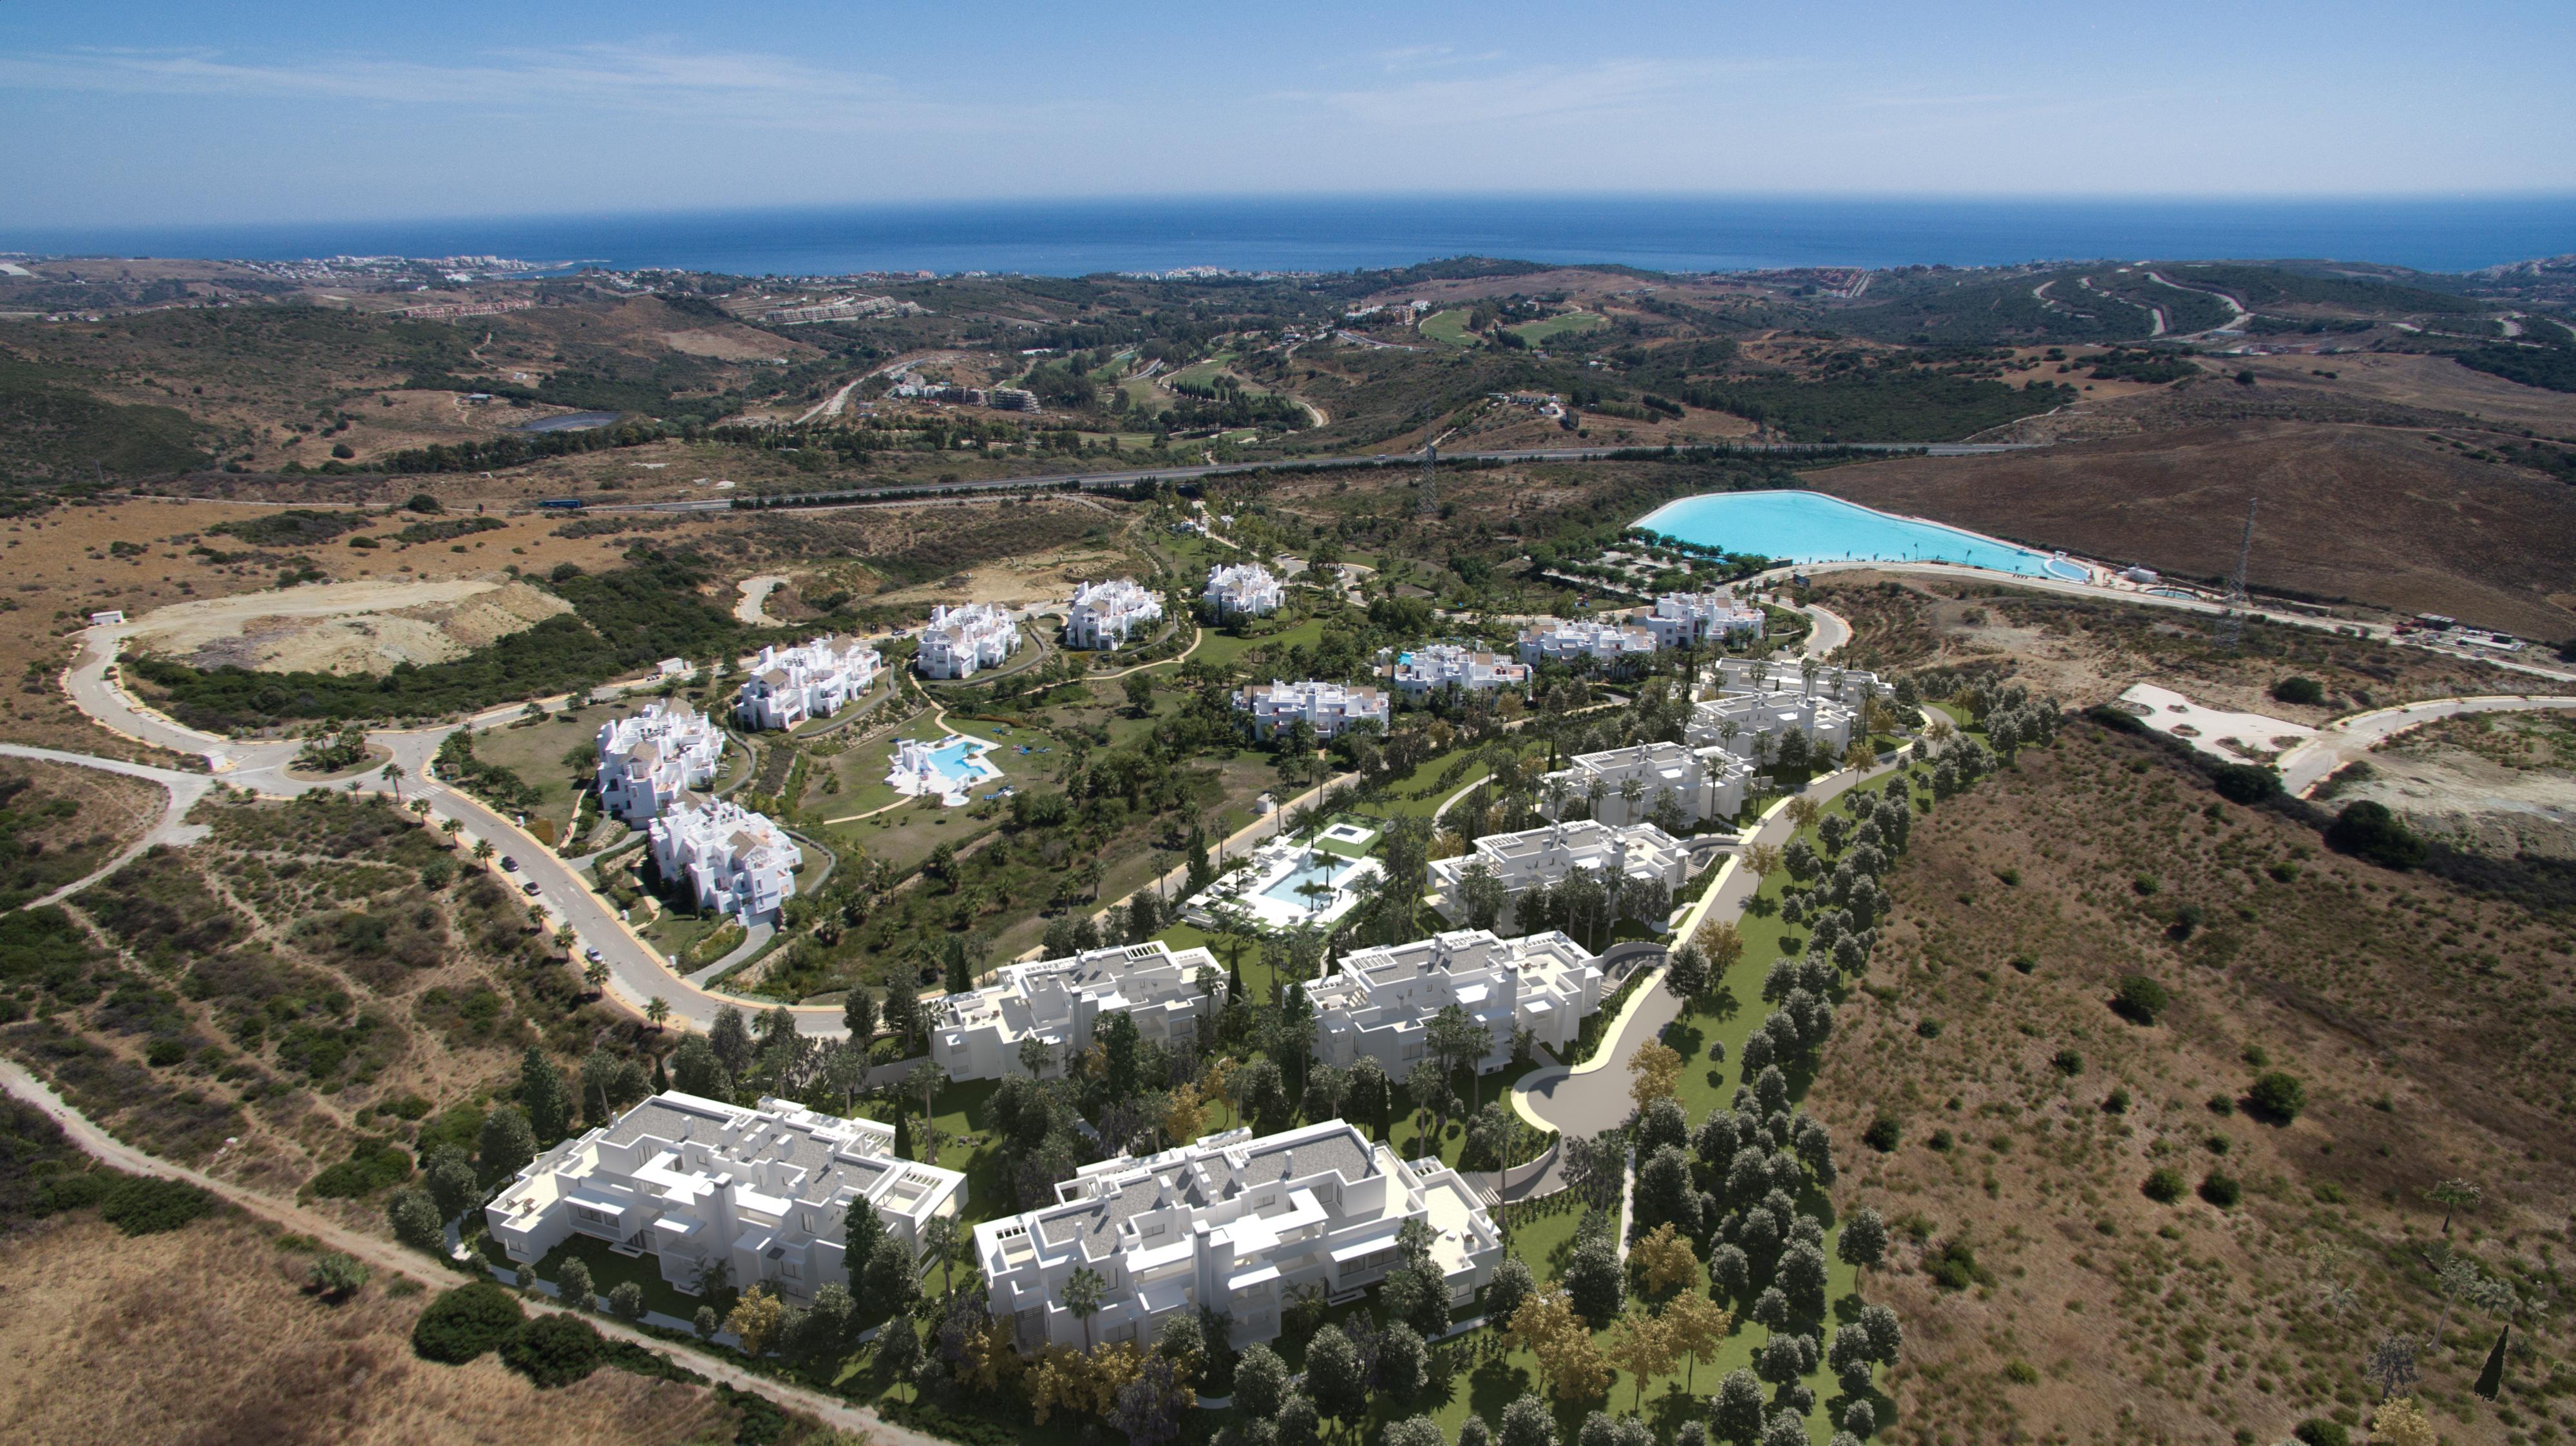 Prices from 285,000. Contemporary Architecture. Casares Costa